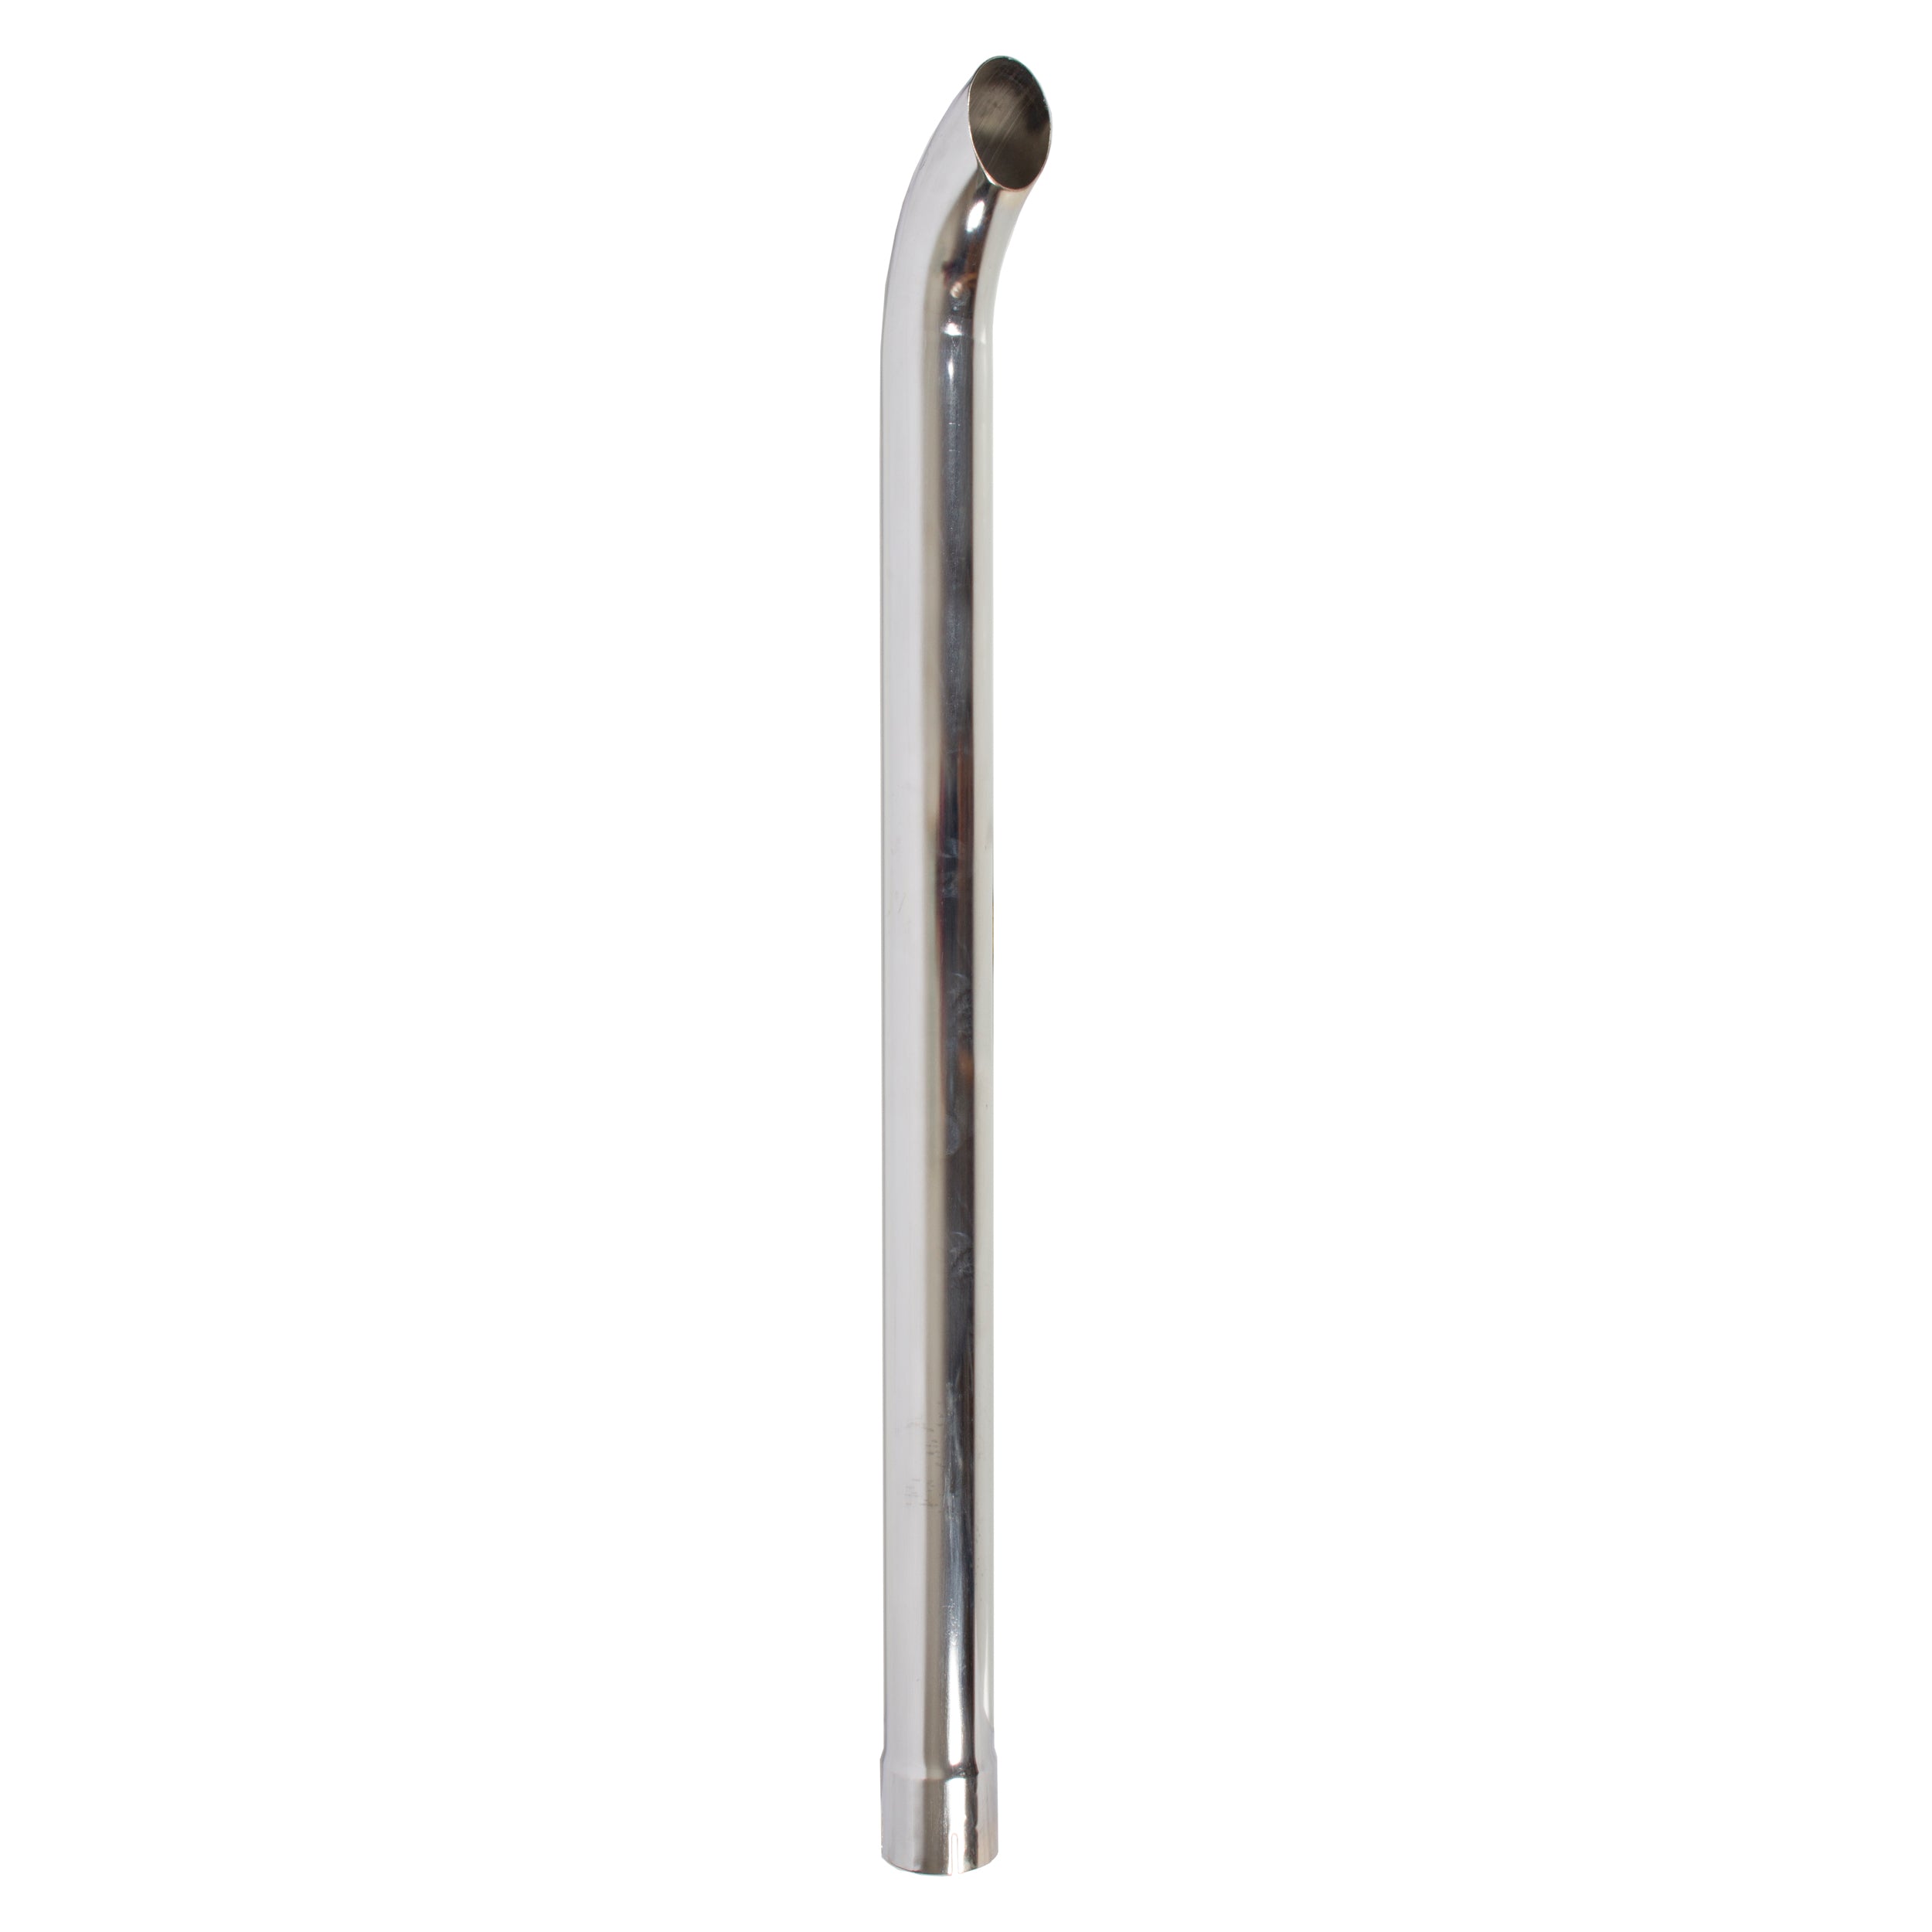 Exhaust Stack Pipe Replacement for UNIVERSAL Pipe - 3'' x 48'' Bended End Pipe Chrome